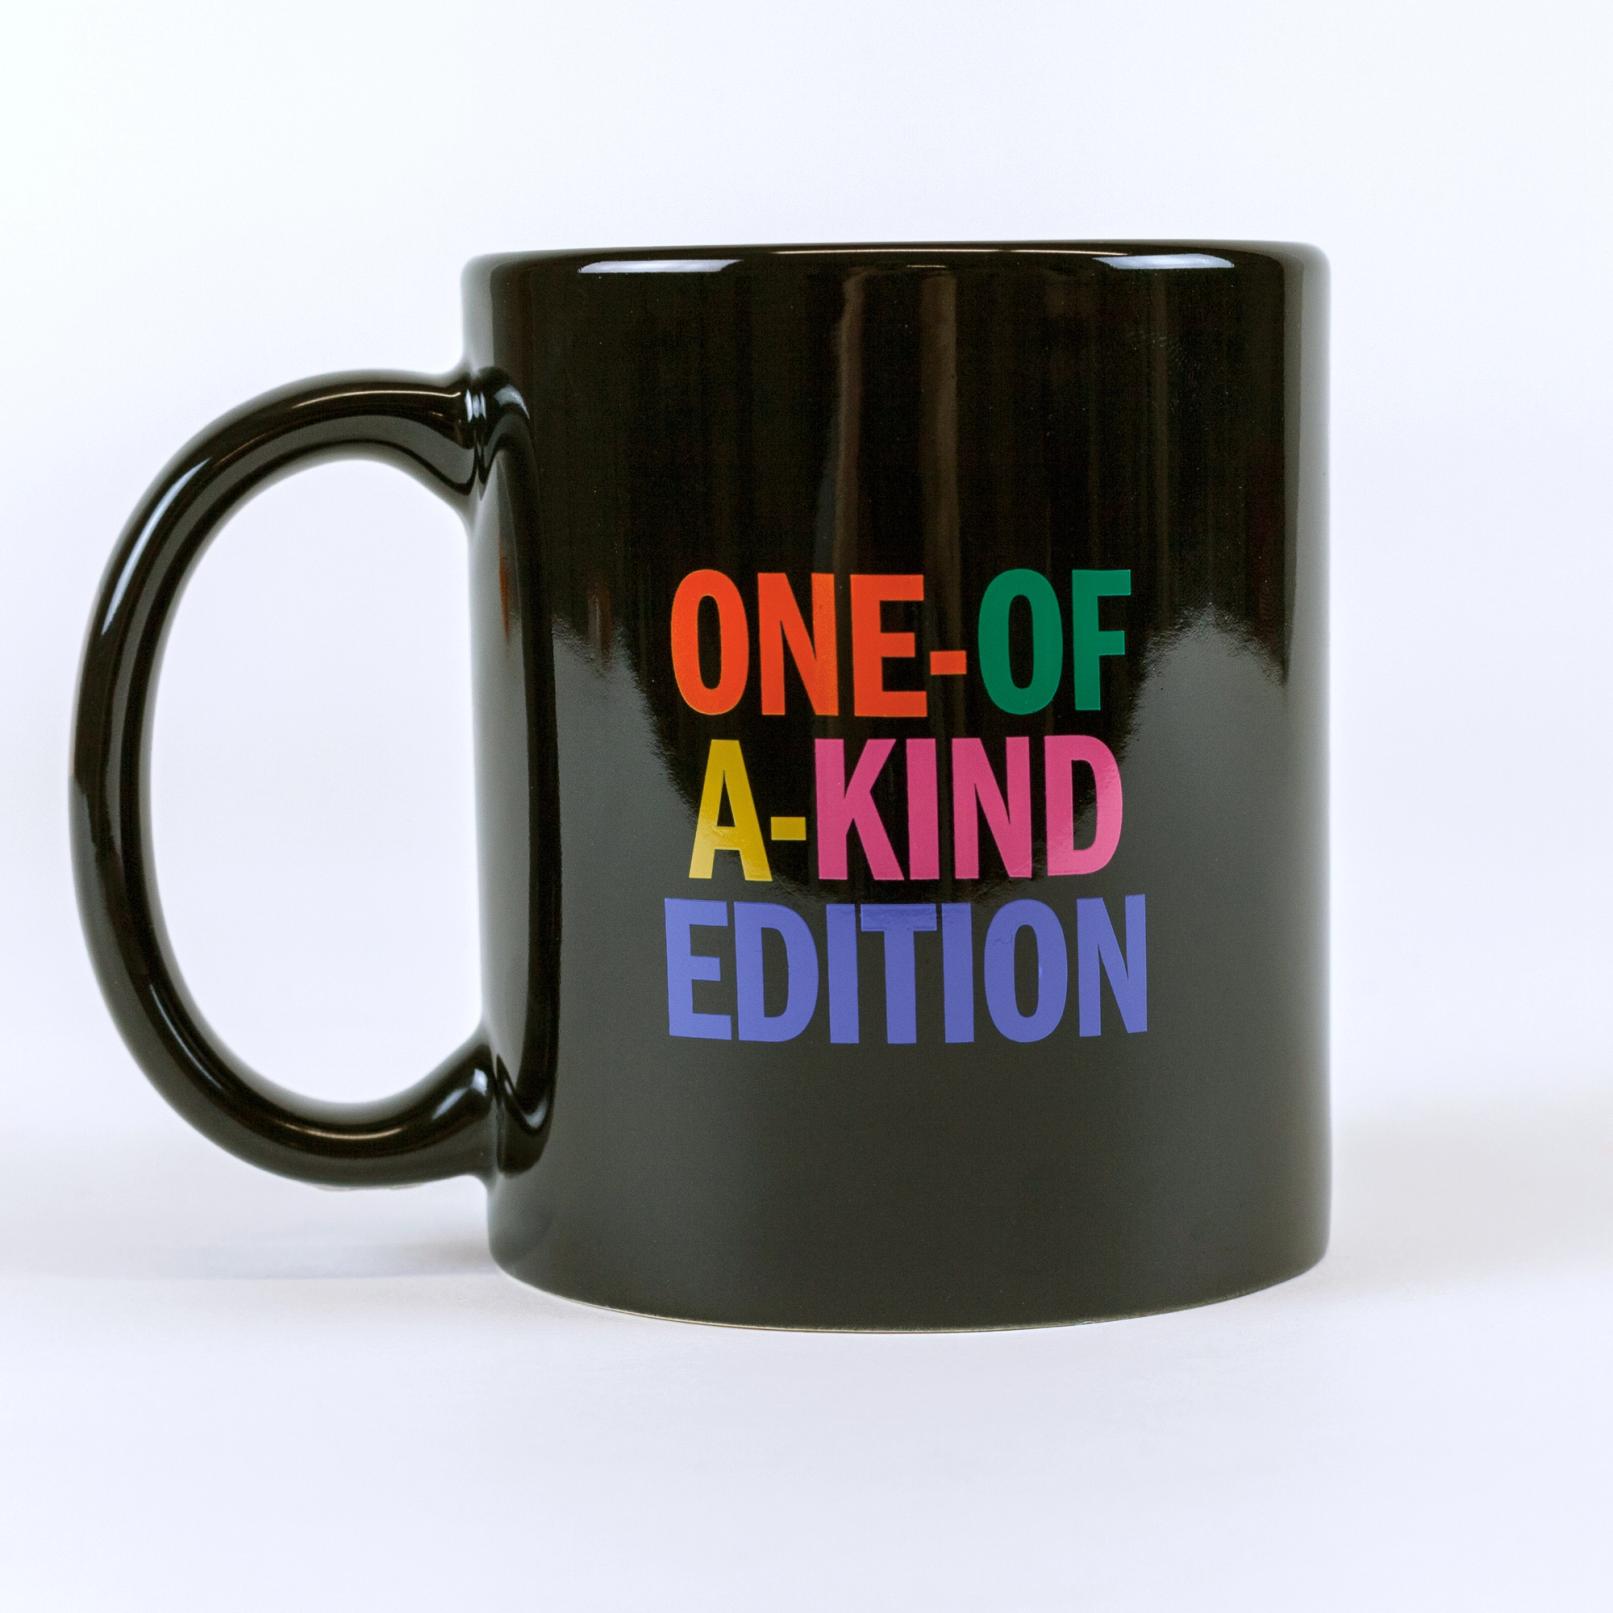 A black colored mug against a white background that reads "ONE-OF-A-KIND EDITION". Each word is in a different color: orange, green, gold, pink and blue.